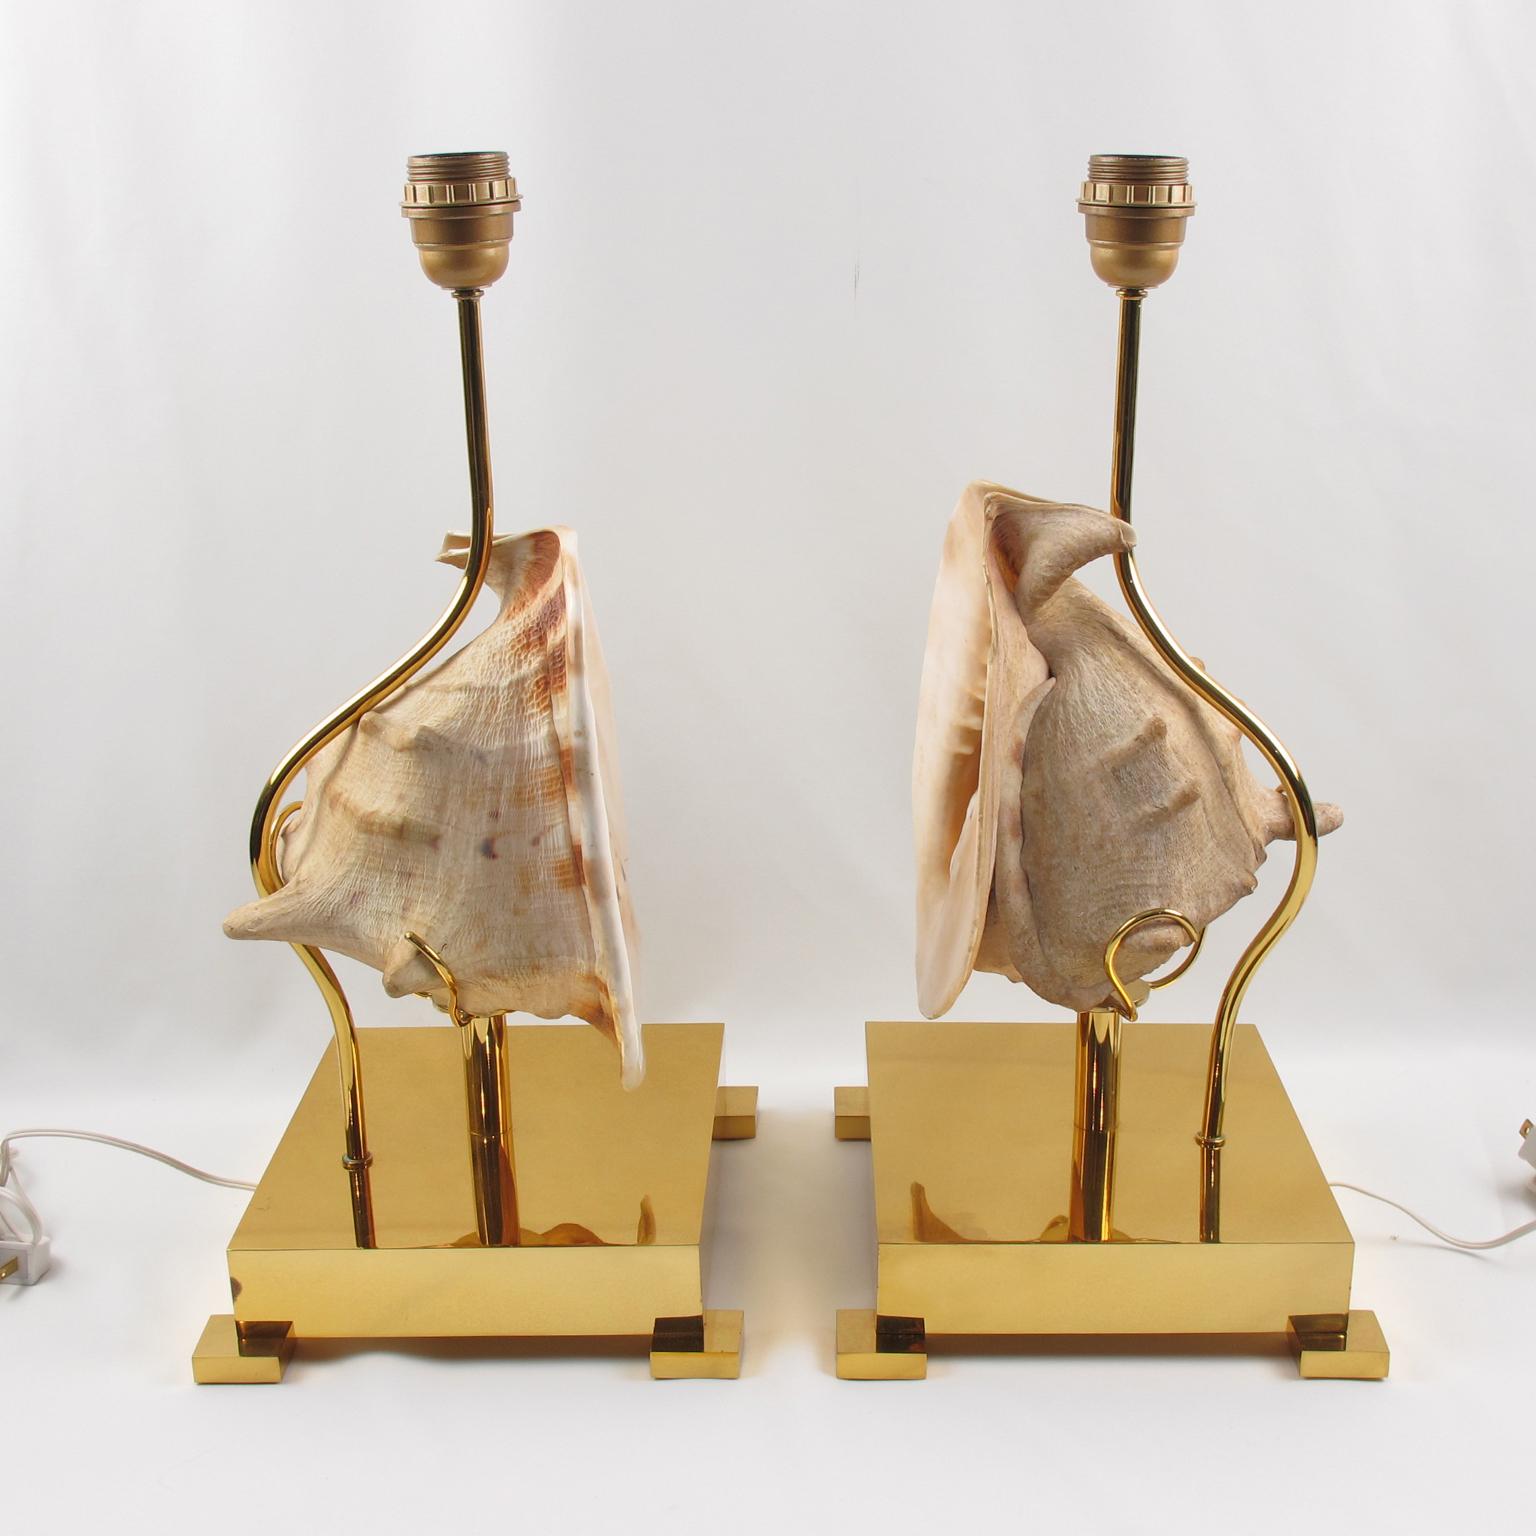 Willy Daro Brass Table Lamps with Mounted Seashell, a pair In Good Condition For Sale In Atlanta, GA